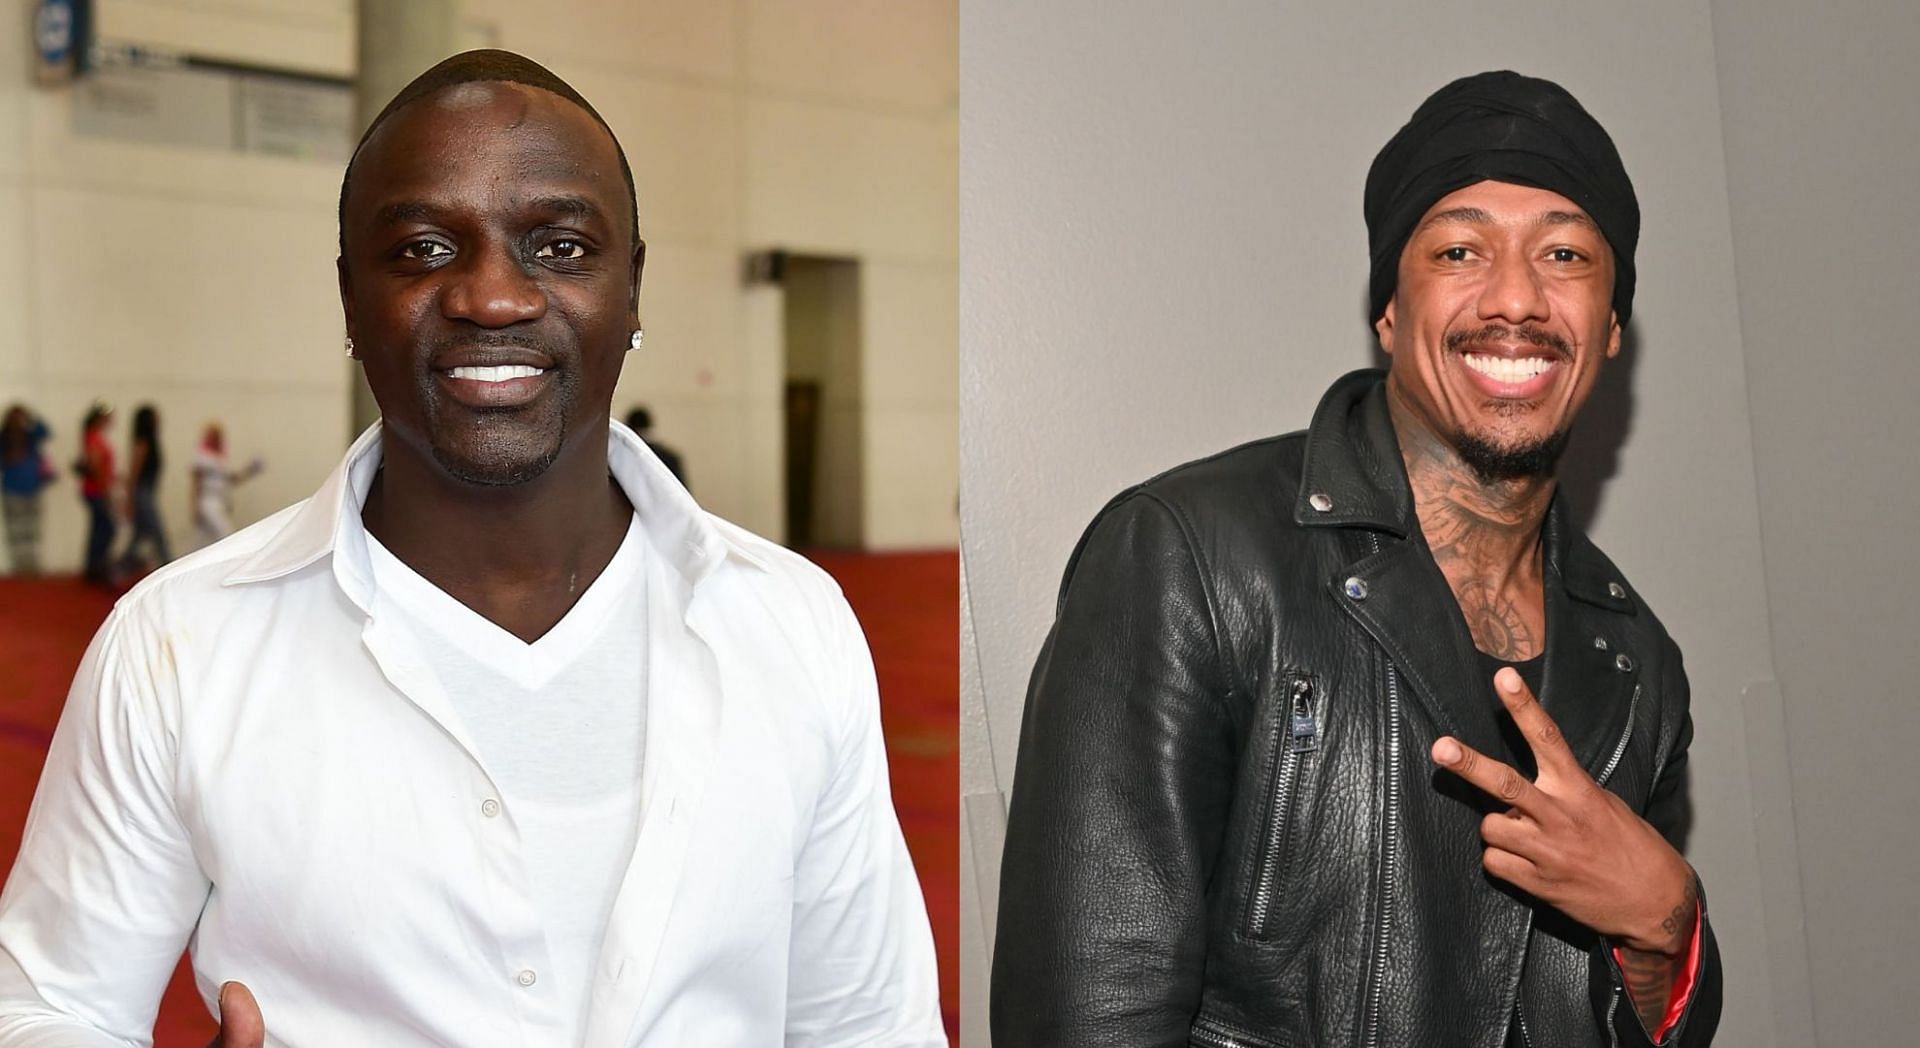 Akon defended Nick Cannon